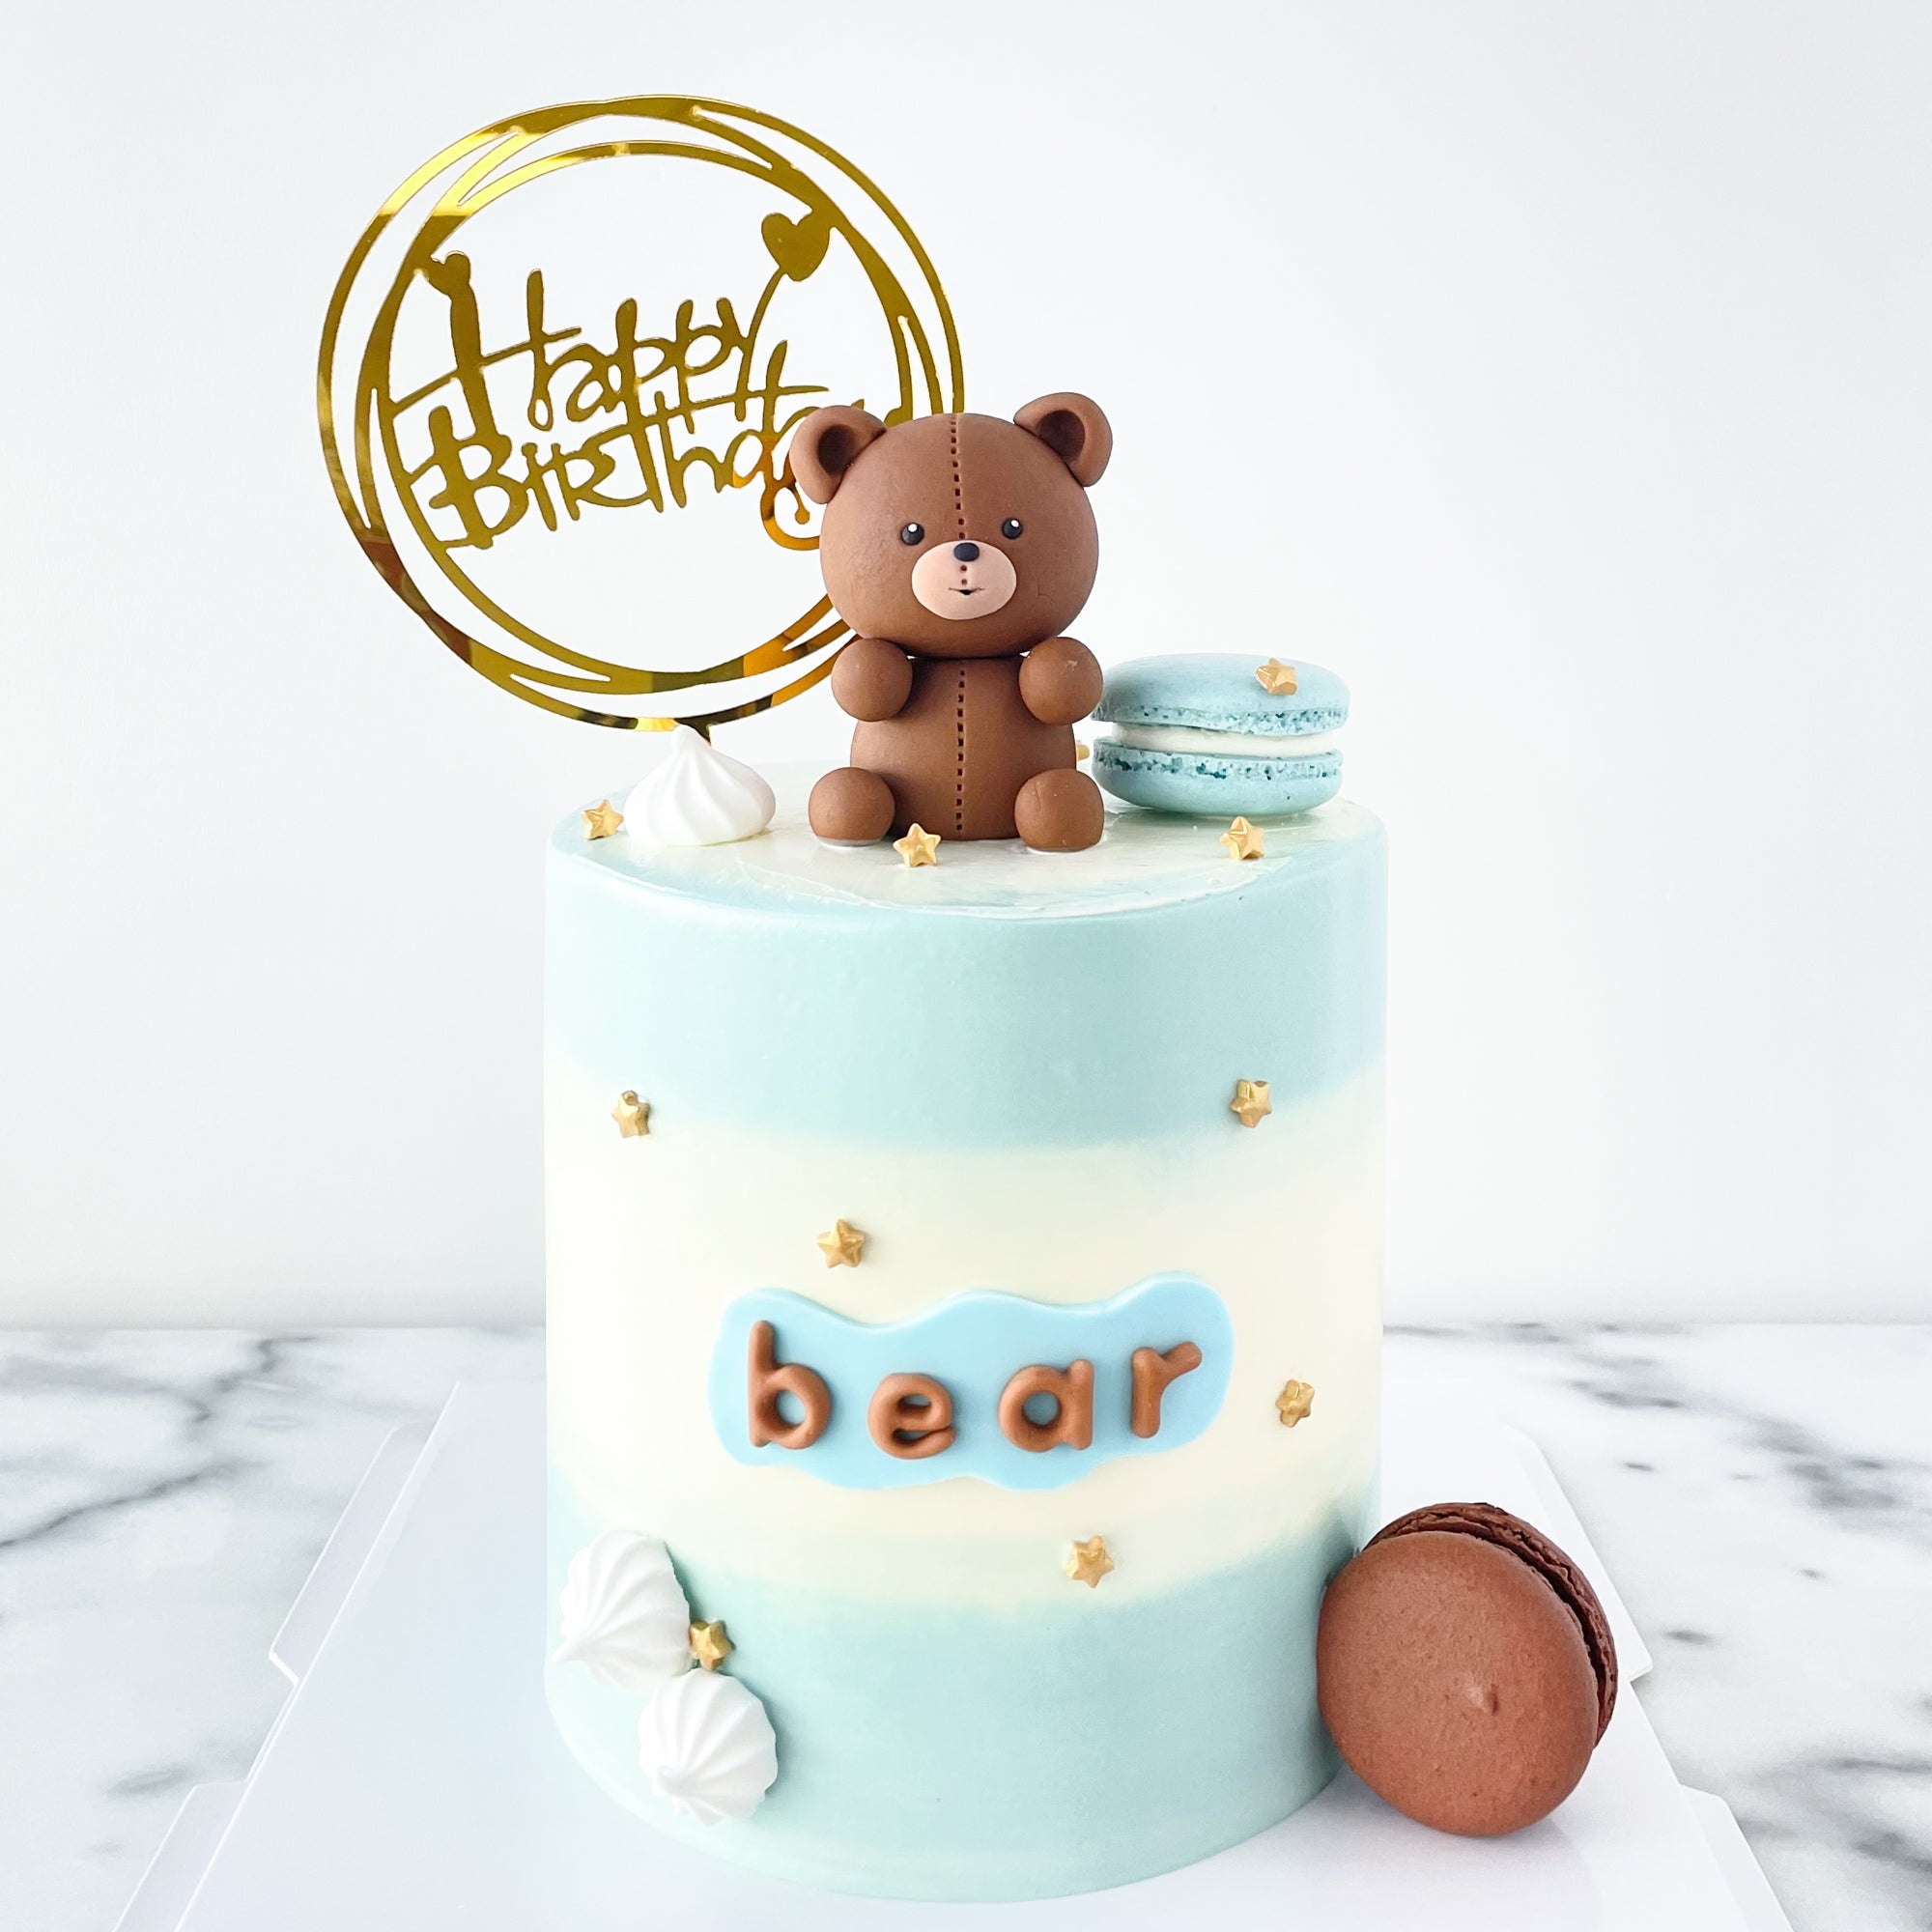 Bear Birthday Cake Ideas Images (Pictures)